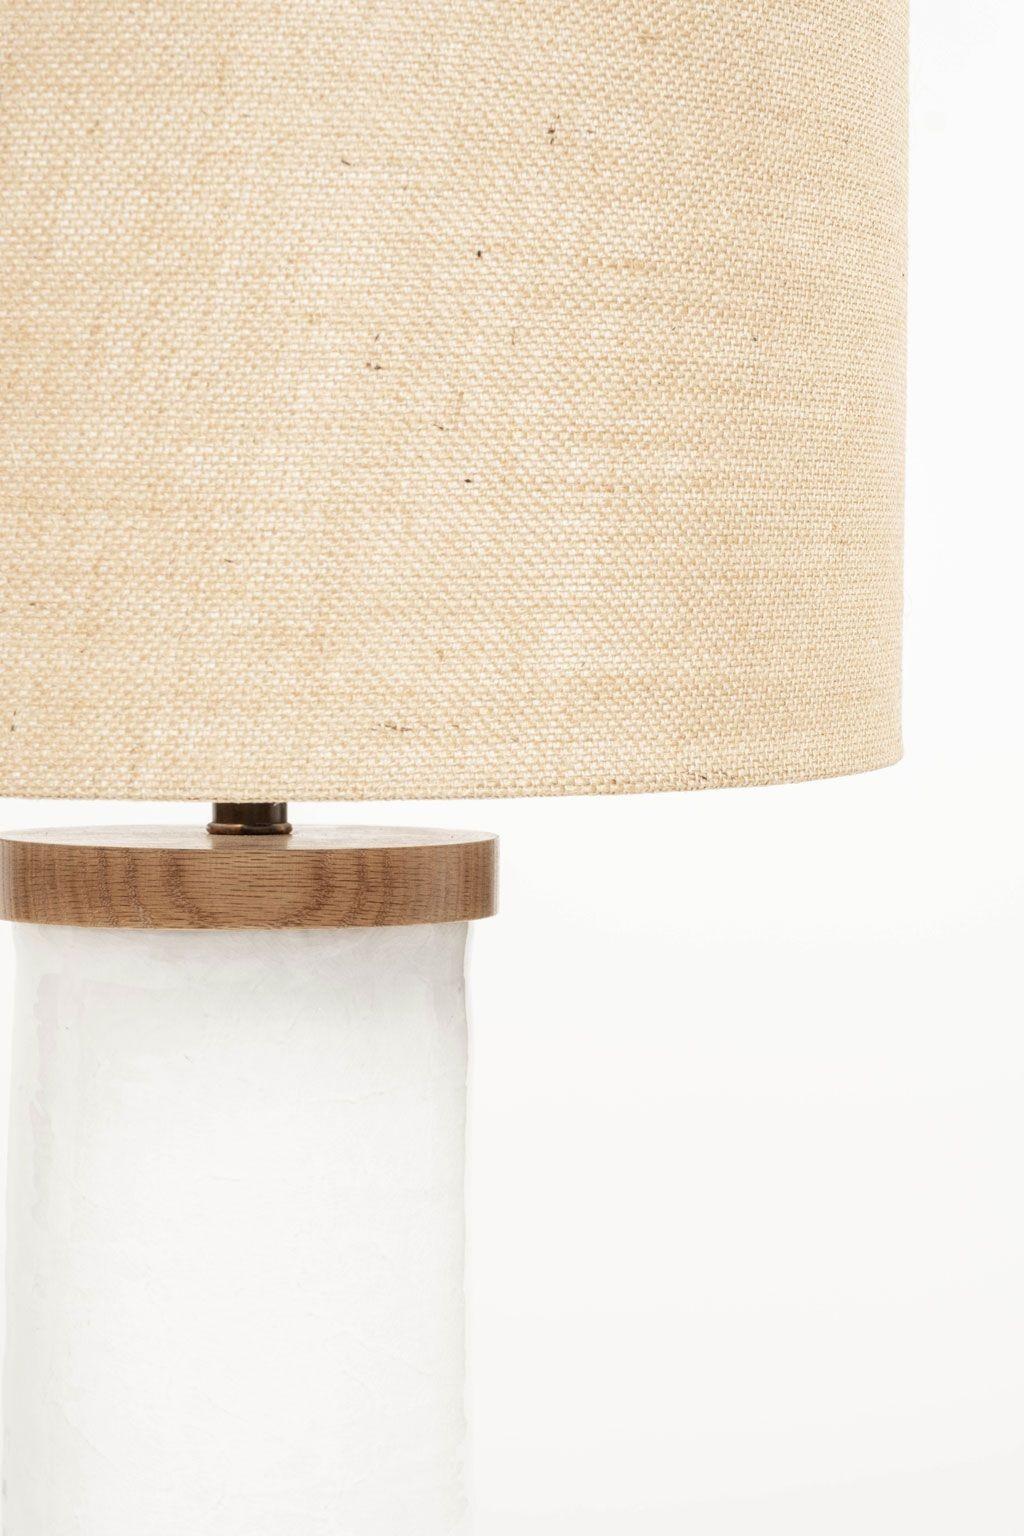 White cylinder-shape table lamp, custom-made from hand-thrown ceramic cylinder finished with wooden base and top. Newly wired for use within the USA using all UL listed parts. Lamp includes dimmer switch and complementary burlap shade. Listed